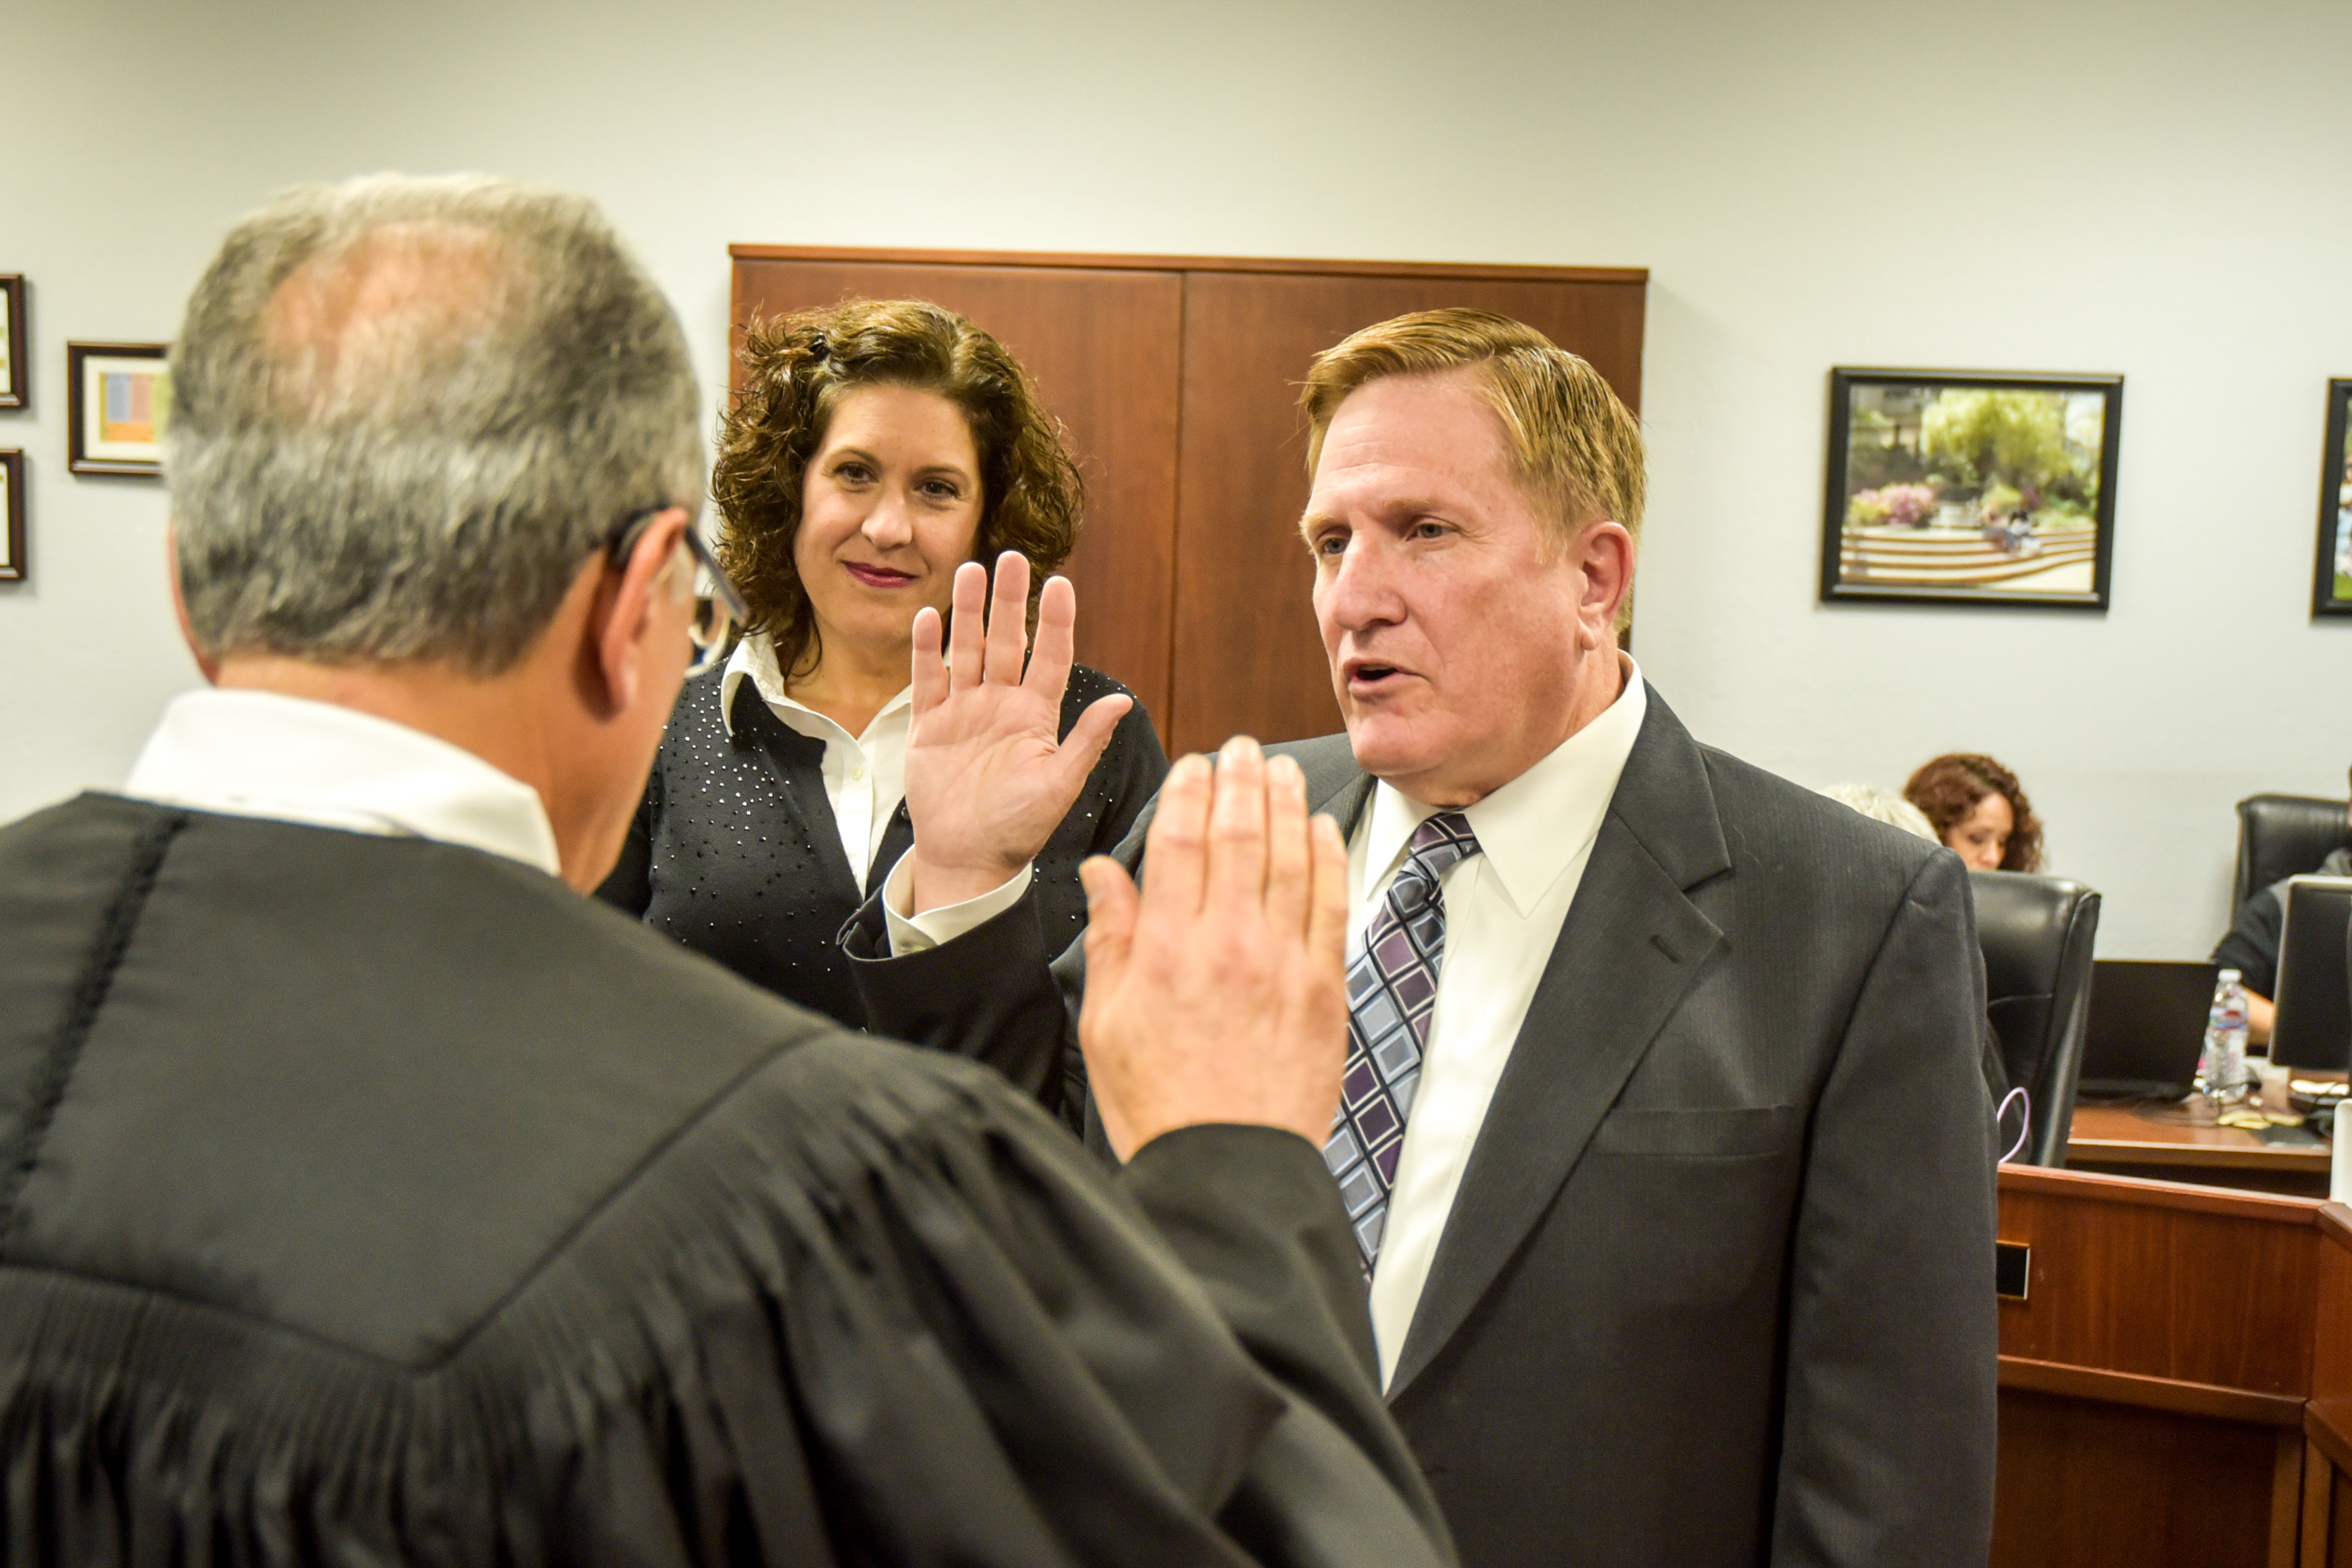 New San Joaquin Delta College Trustee Charles Jennings is sworn in while his wife, Heather, watches.